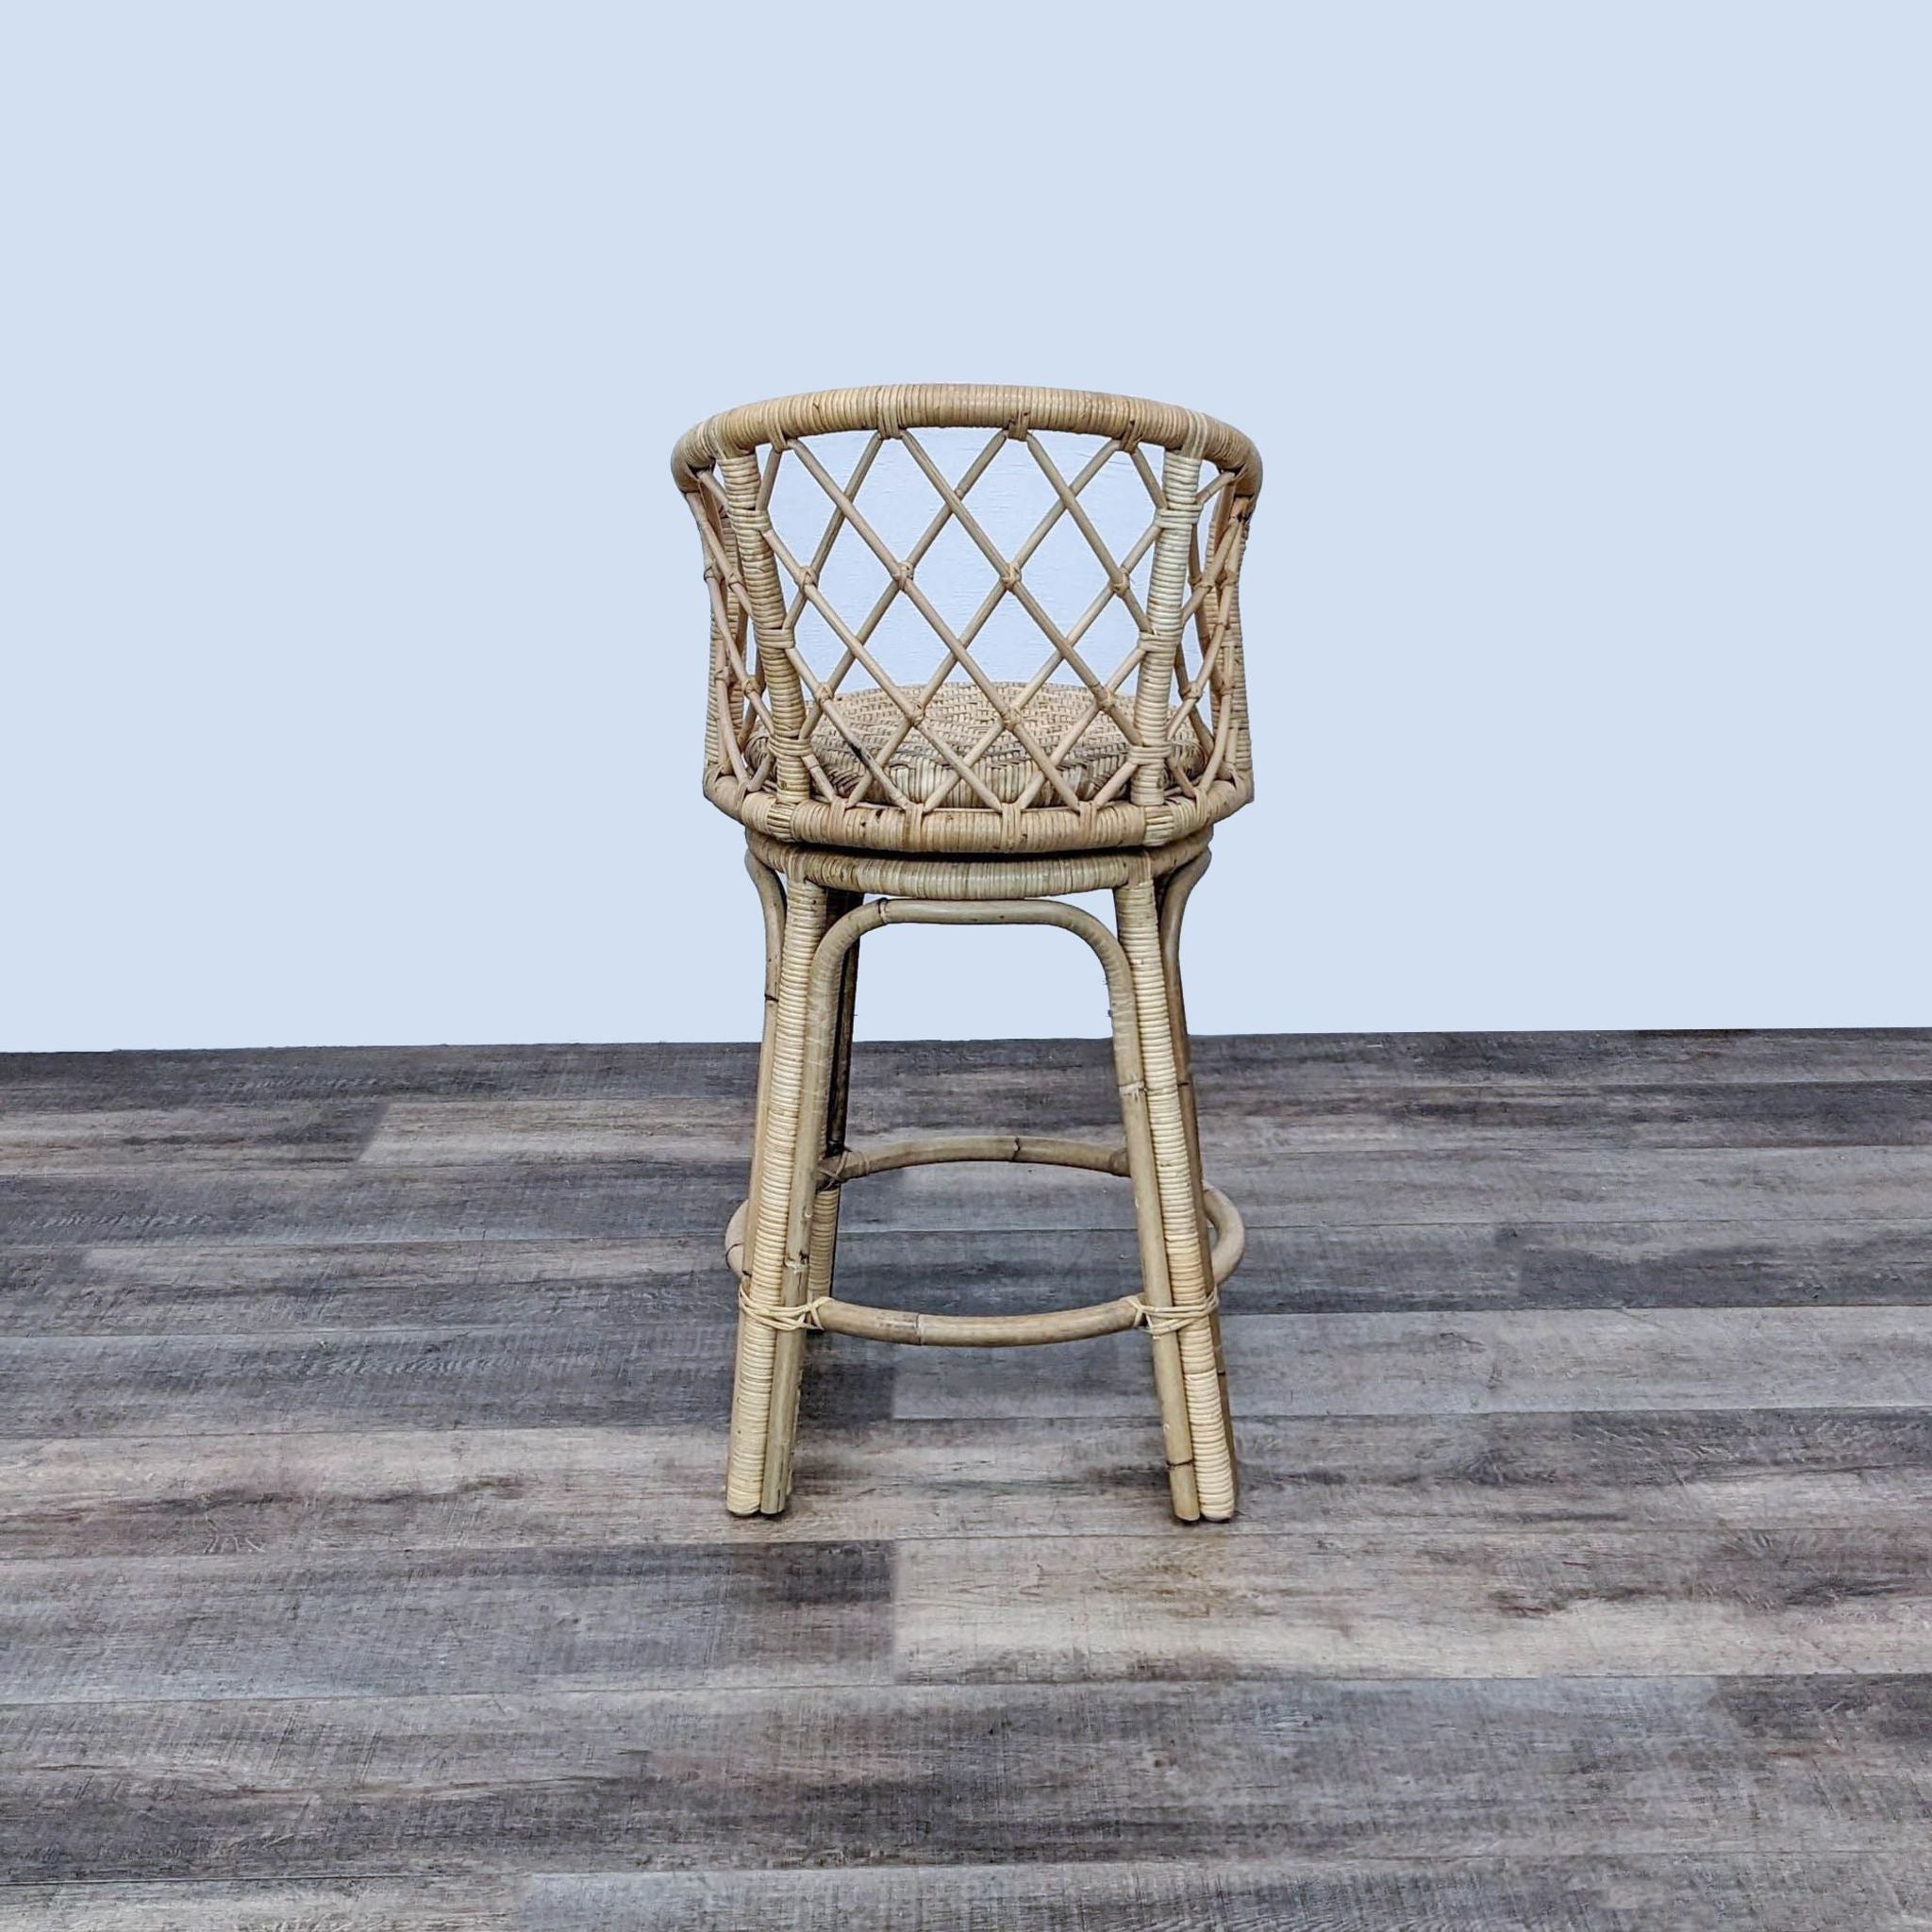 Serena and Lily Avalon rattan swivel stool in natural color with open weave criss-cross back on a wooden floor.